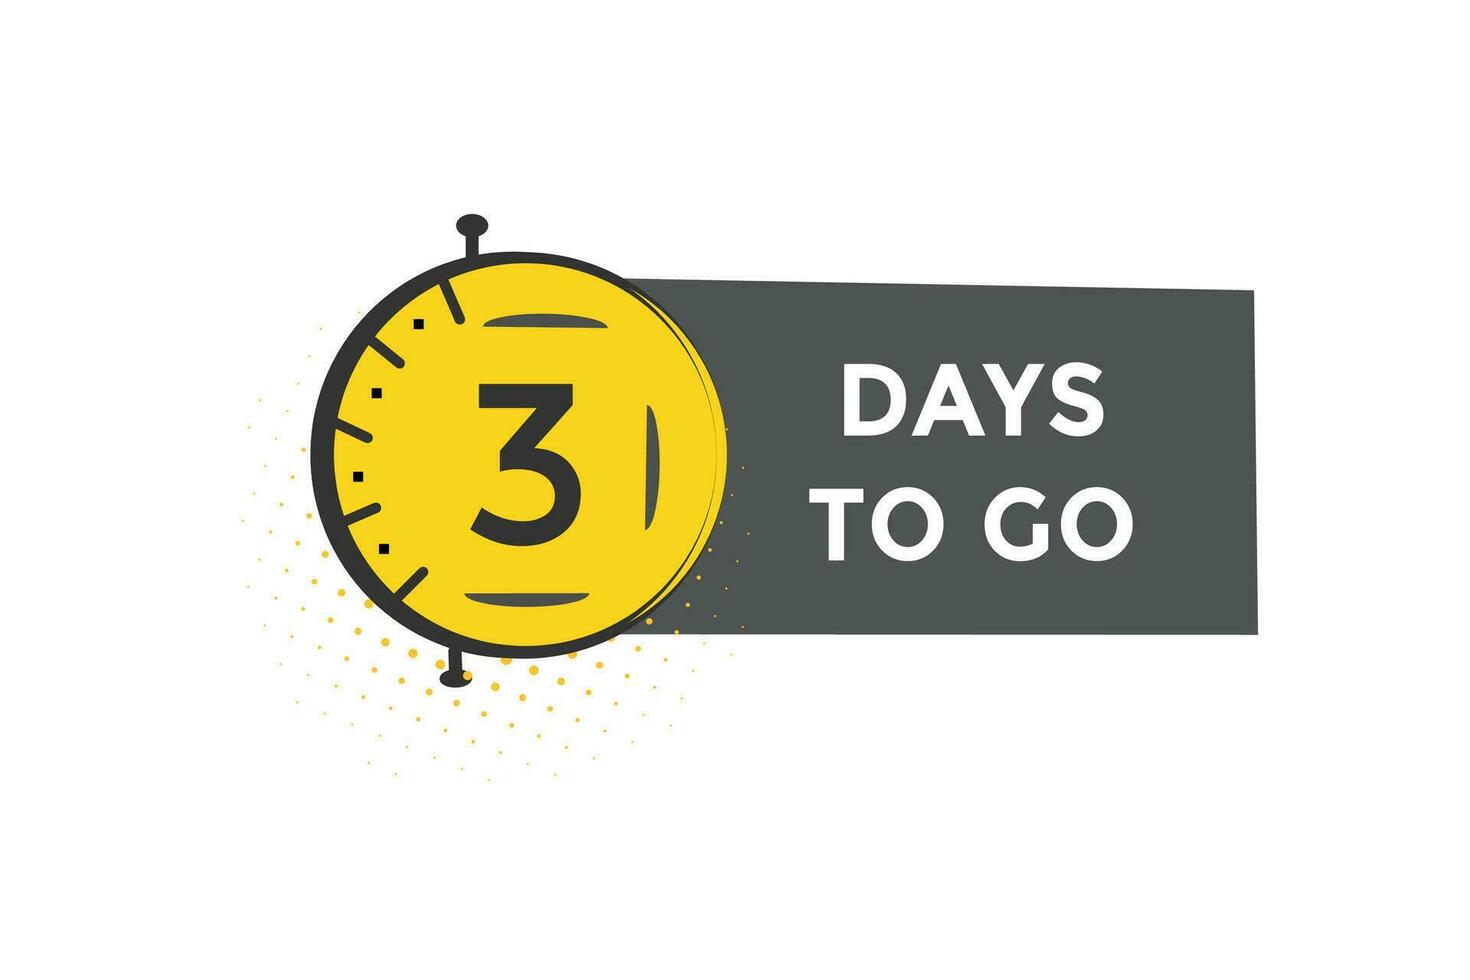 3 days, left countdown to go one time template,3 day countdown left banner label button eps vector